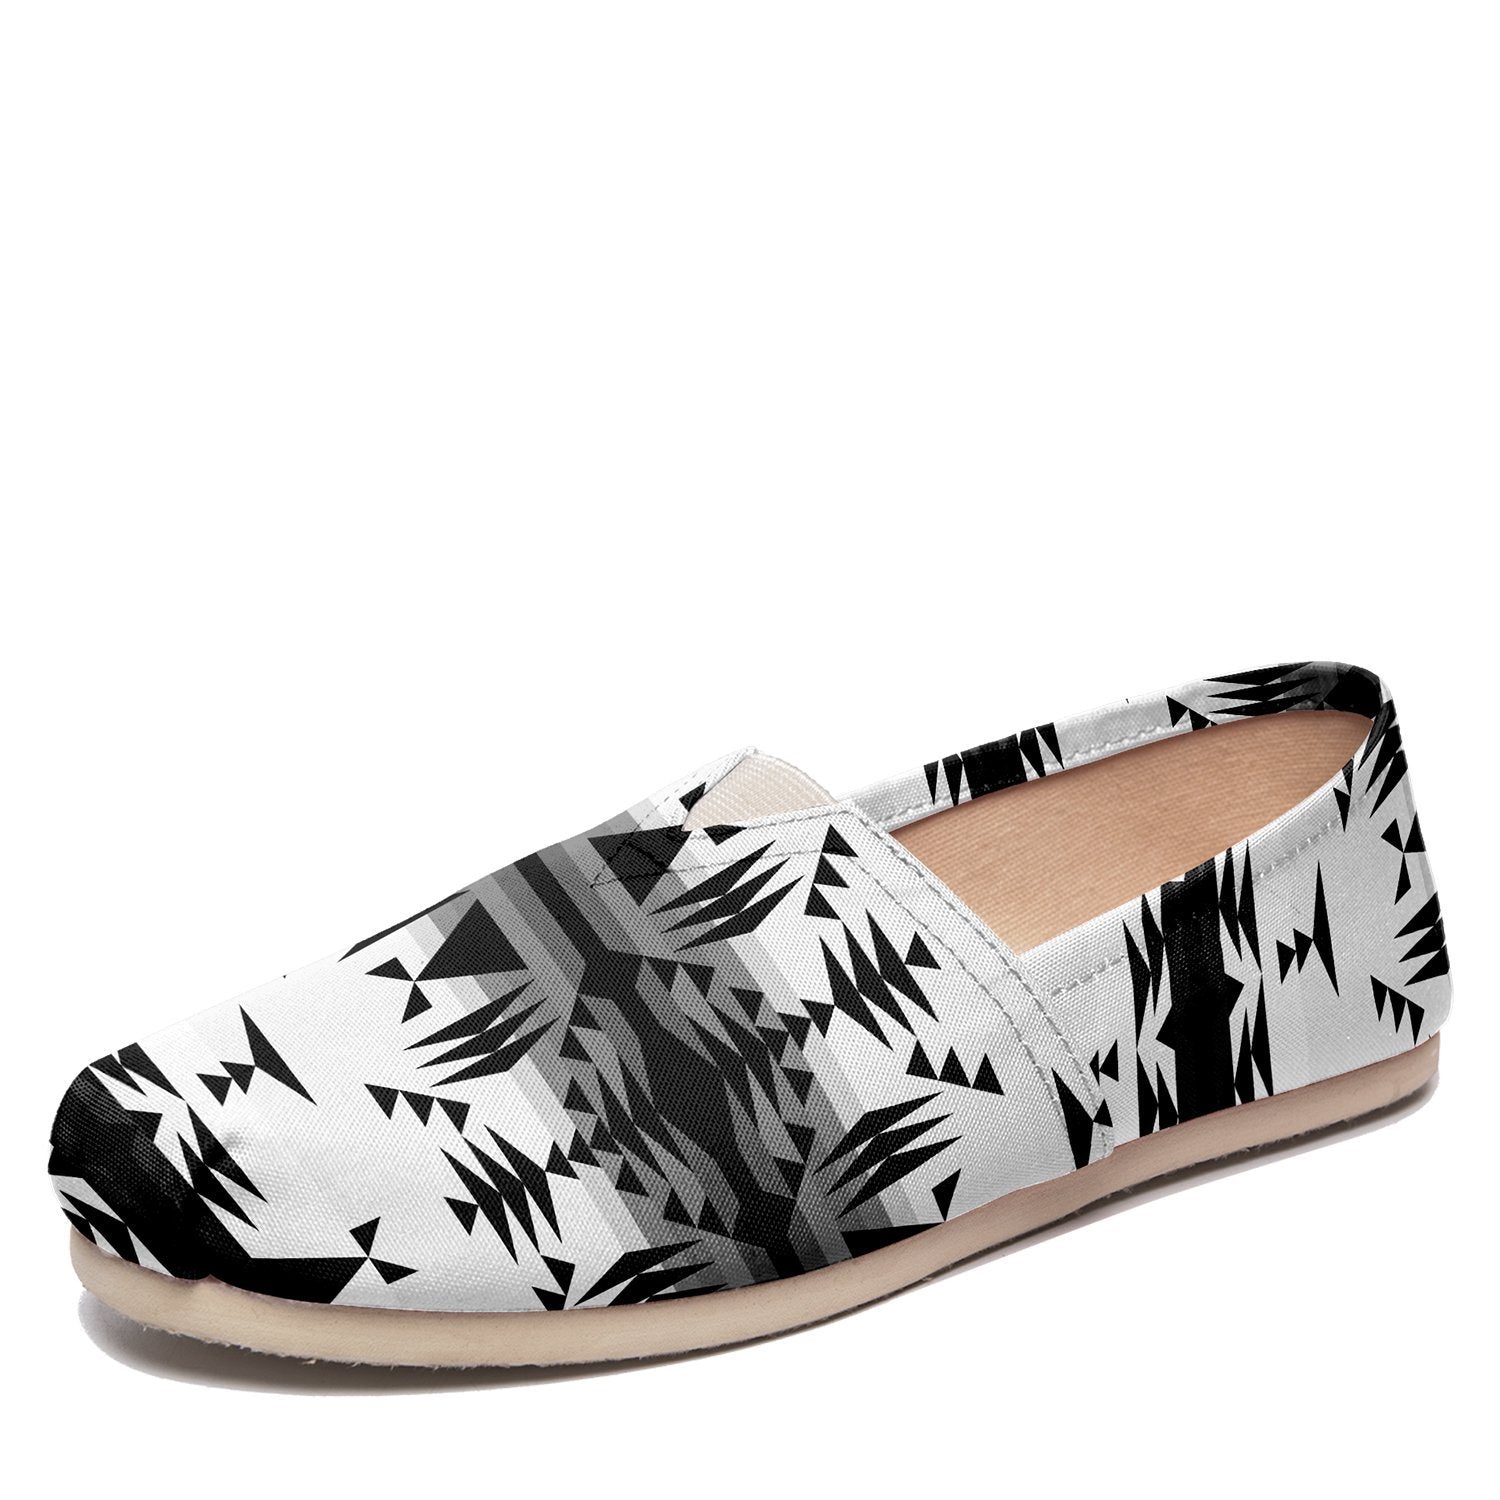 Between the Mountains White and Black Casual Unisex Slip On Shoe Herman 